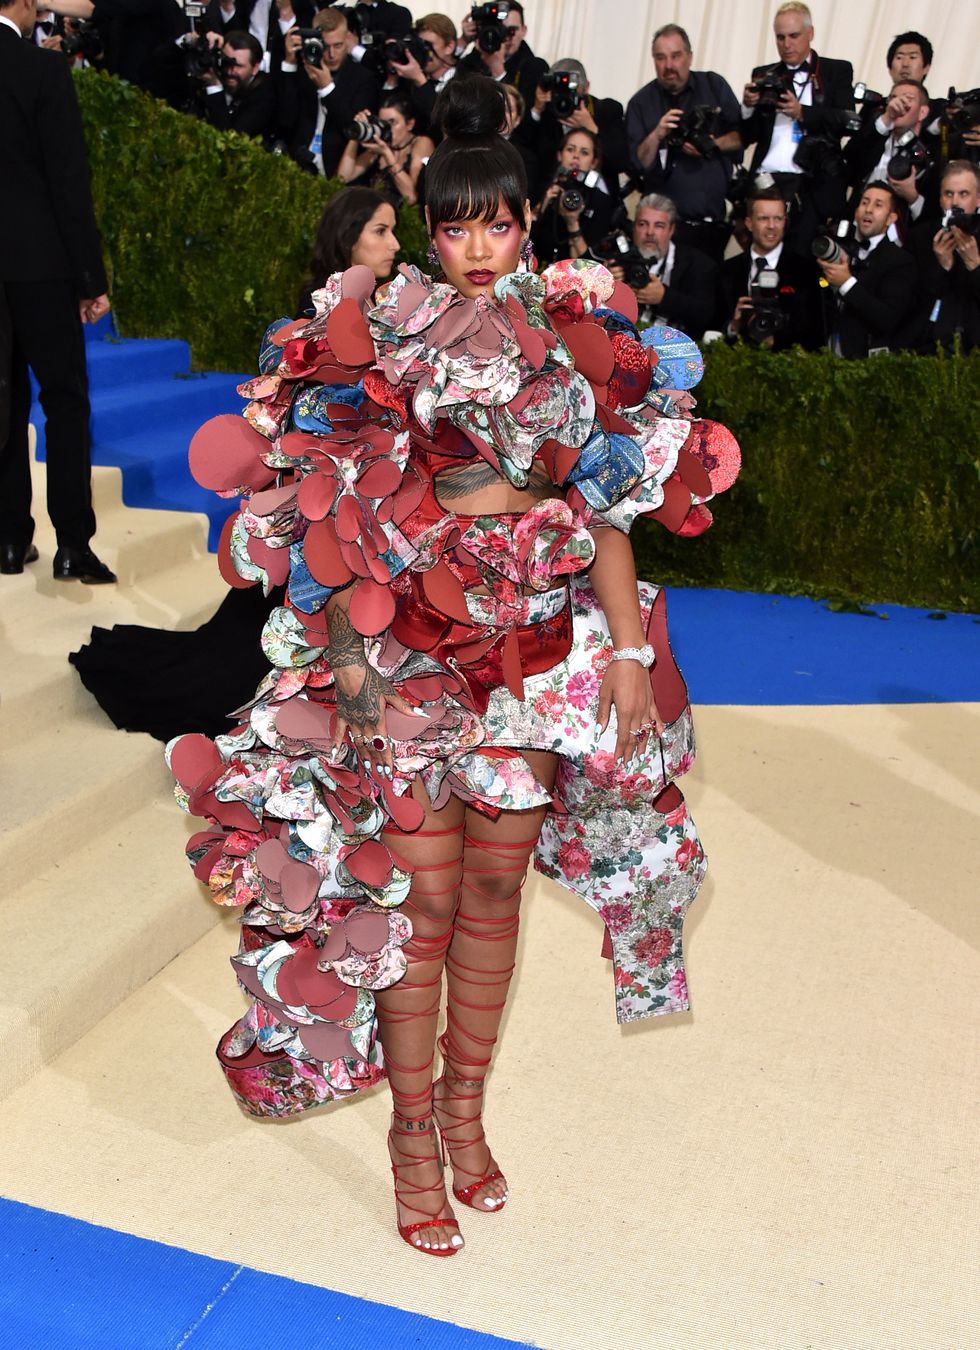 rihanna wearing spectacular gown at the "rei kawakubo comme des garcons art of the in between" costume institute gala